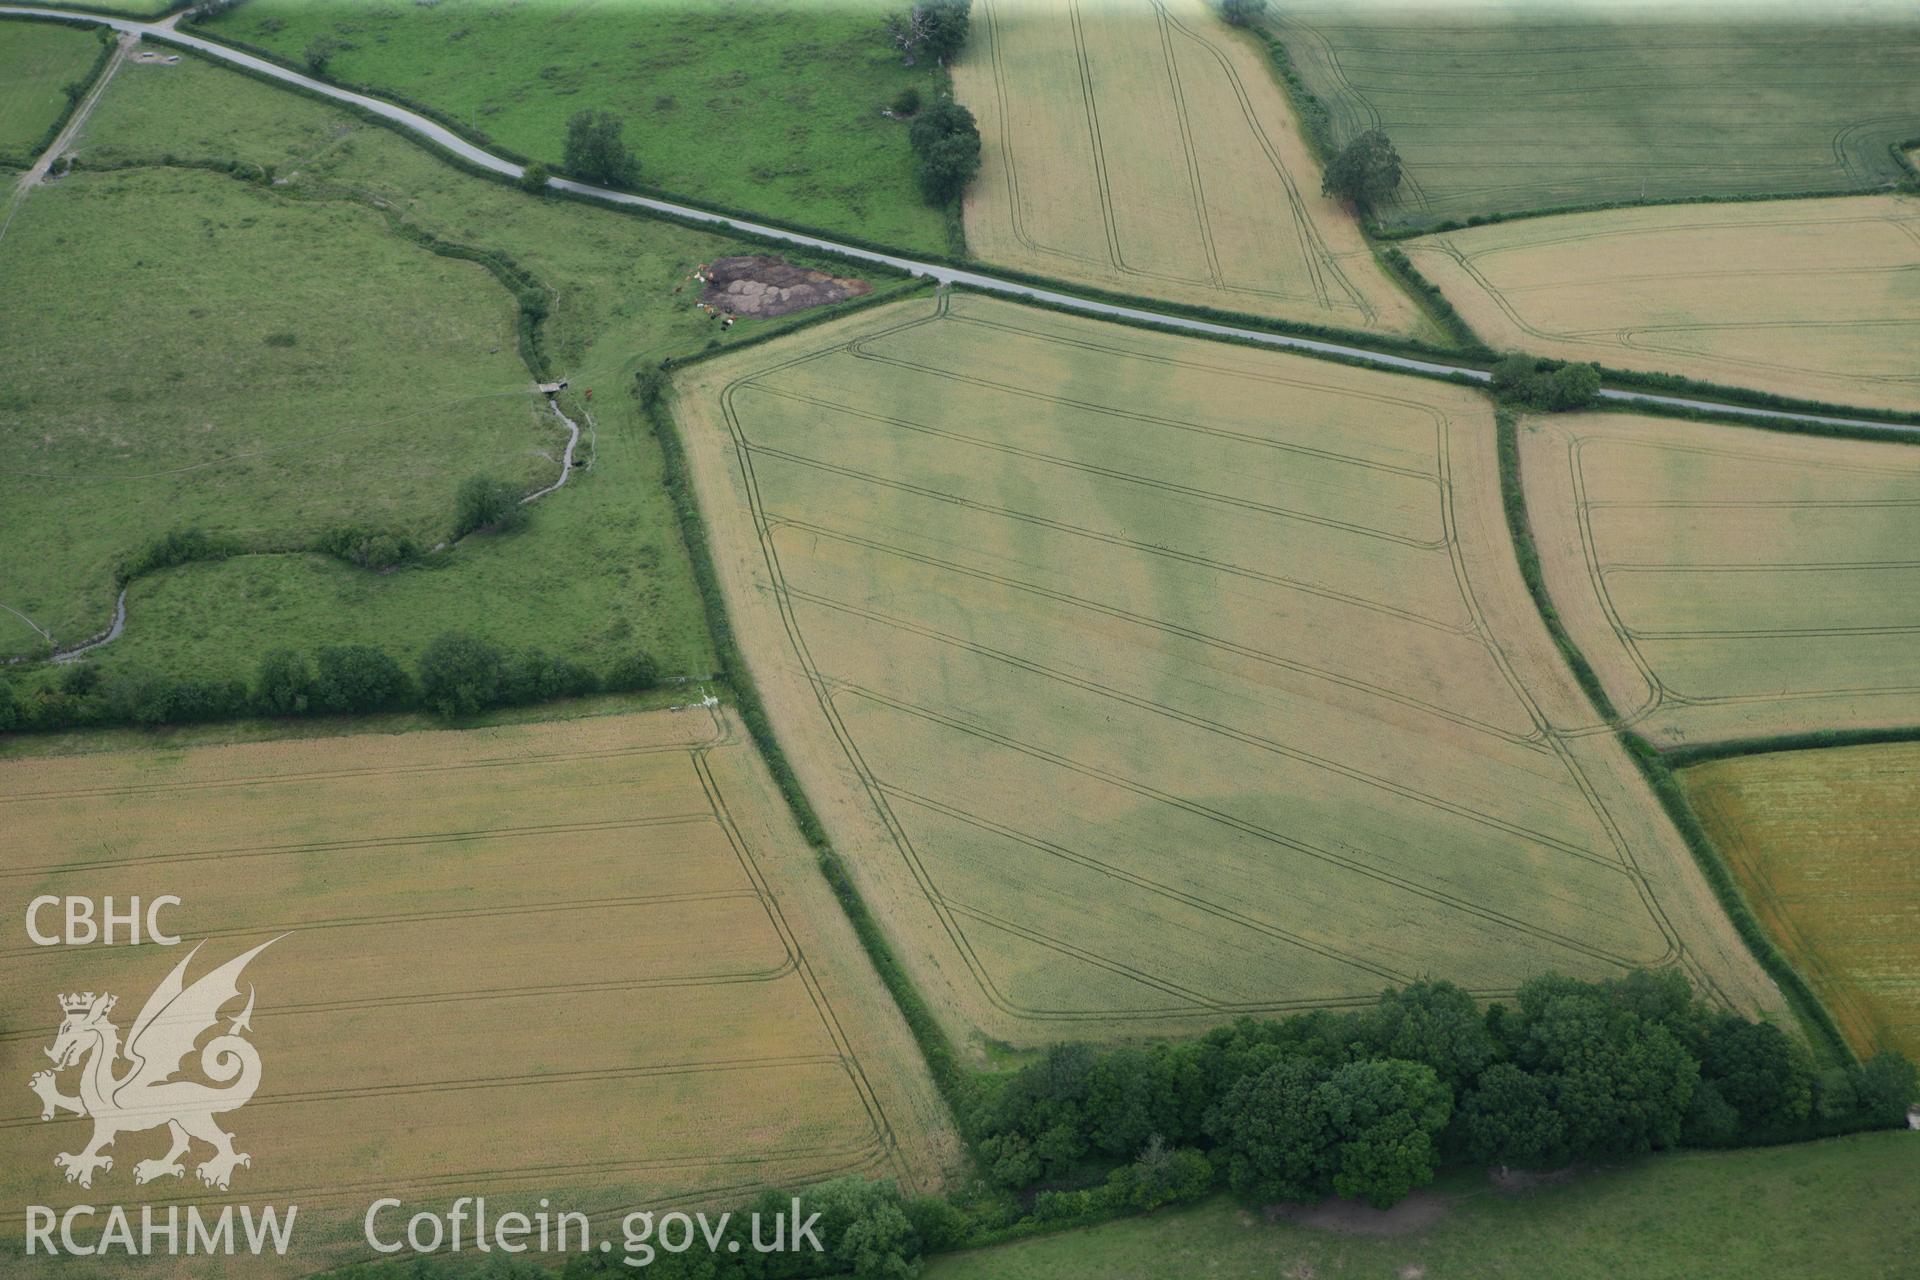 RCAHMW colour oblique photograph of Penthryn Fechan cropmarks. Taken by Toby Driver on 20/07/2011.